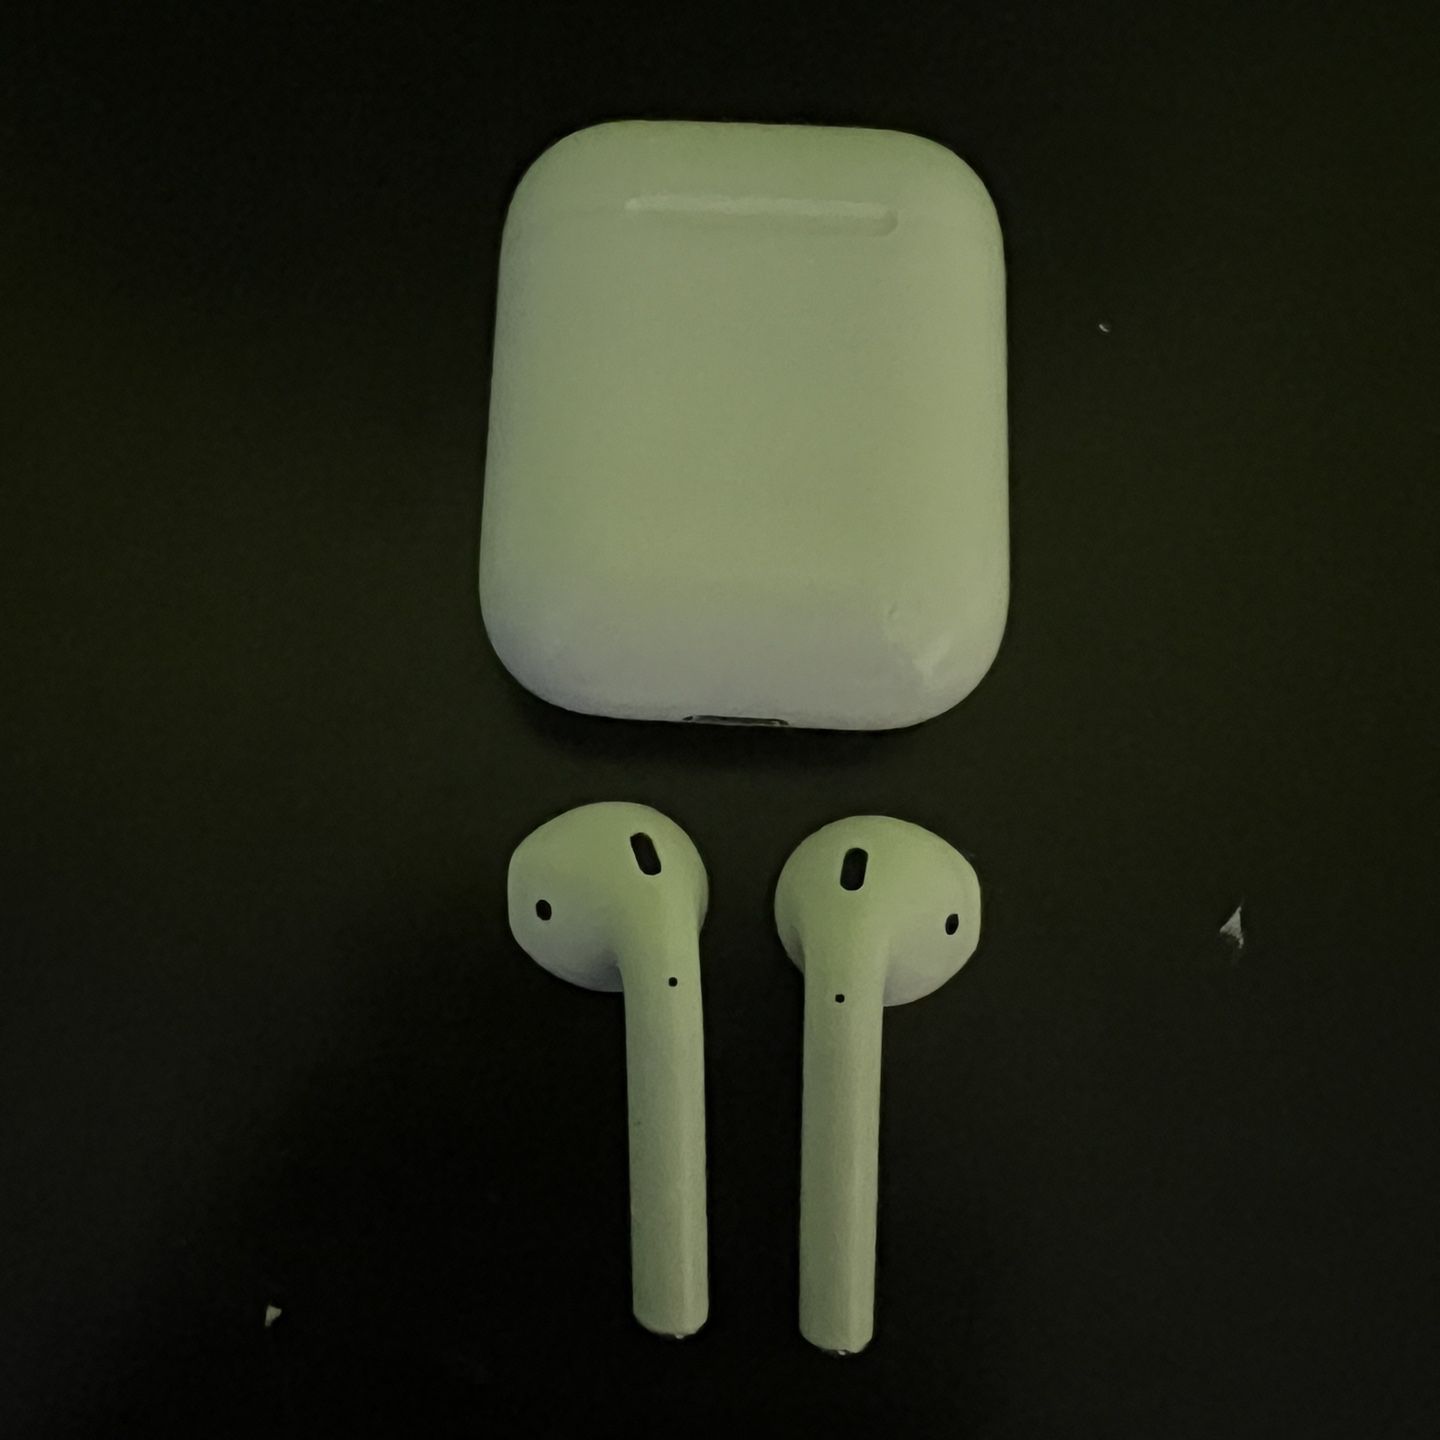 2nd Gen Airpods (charging case)